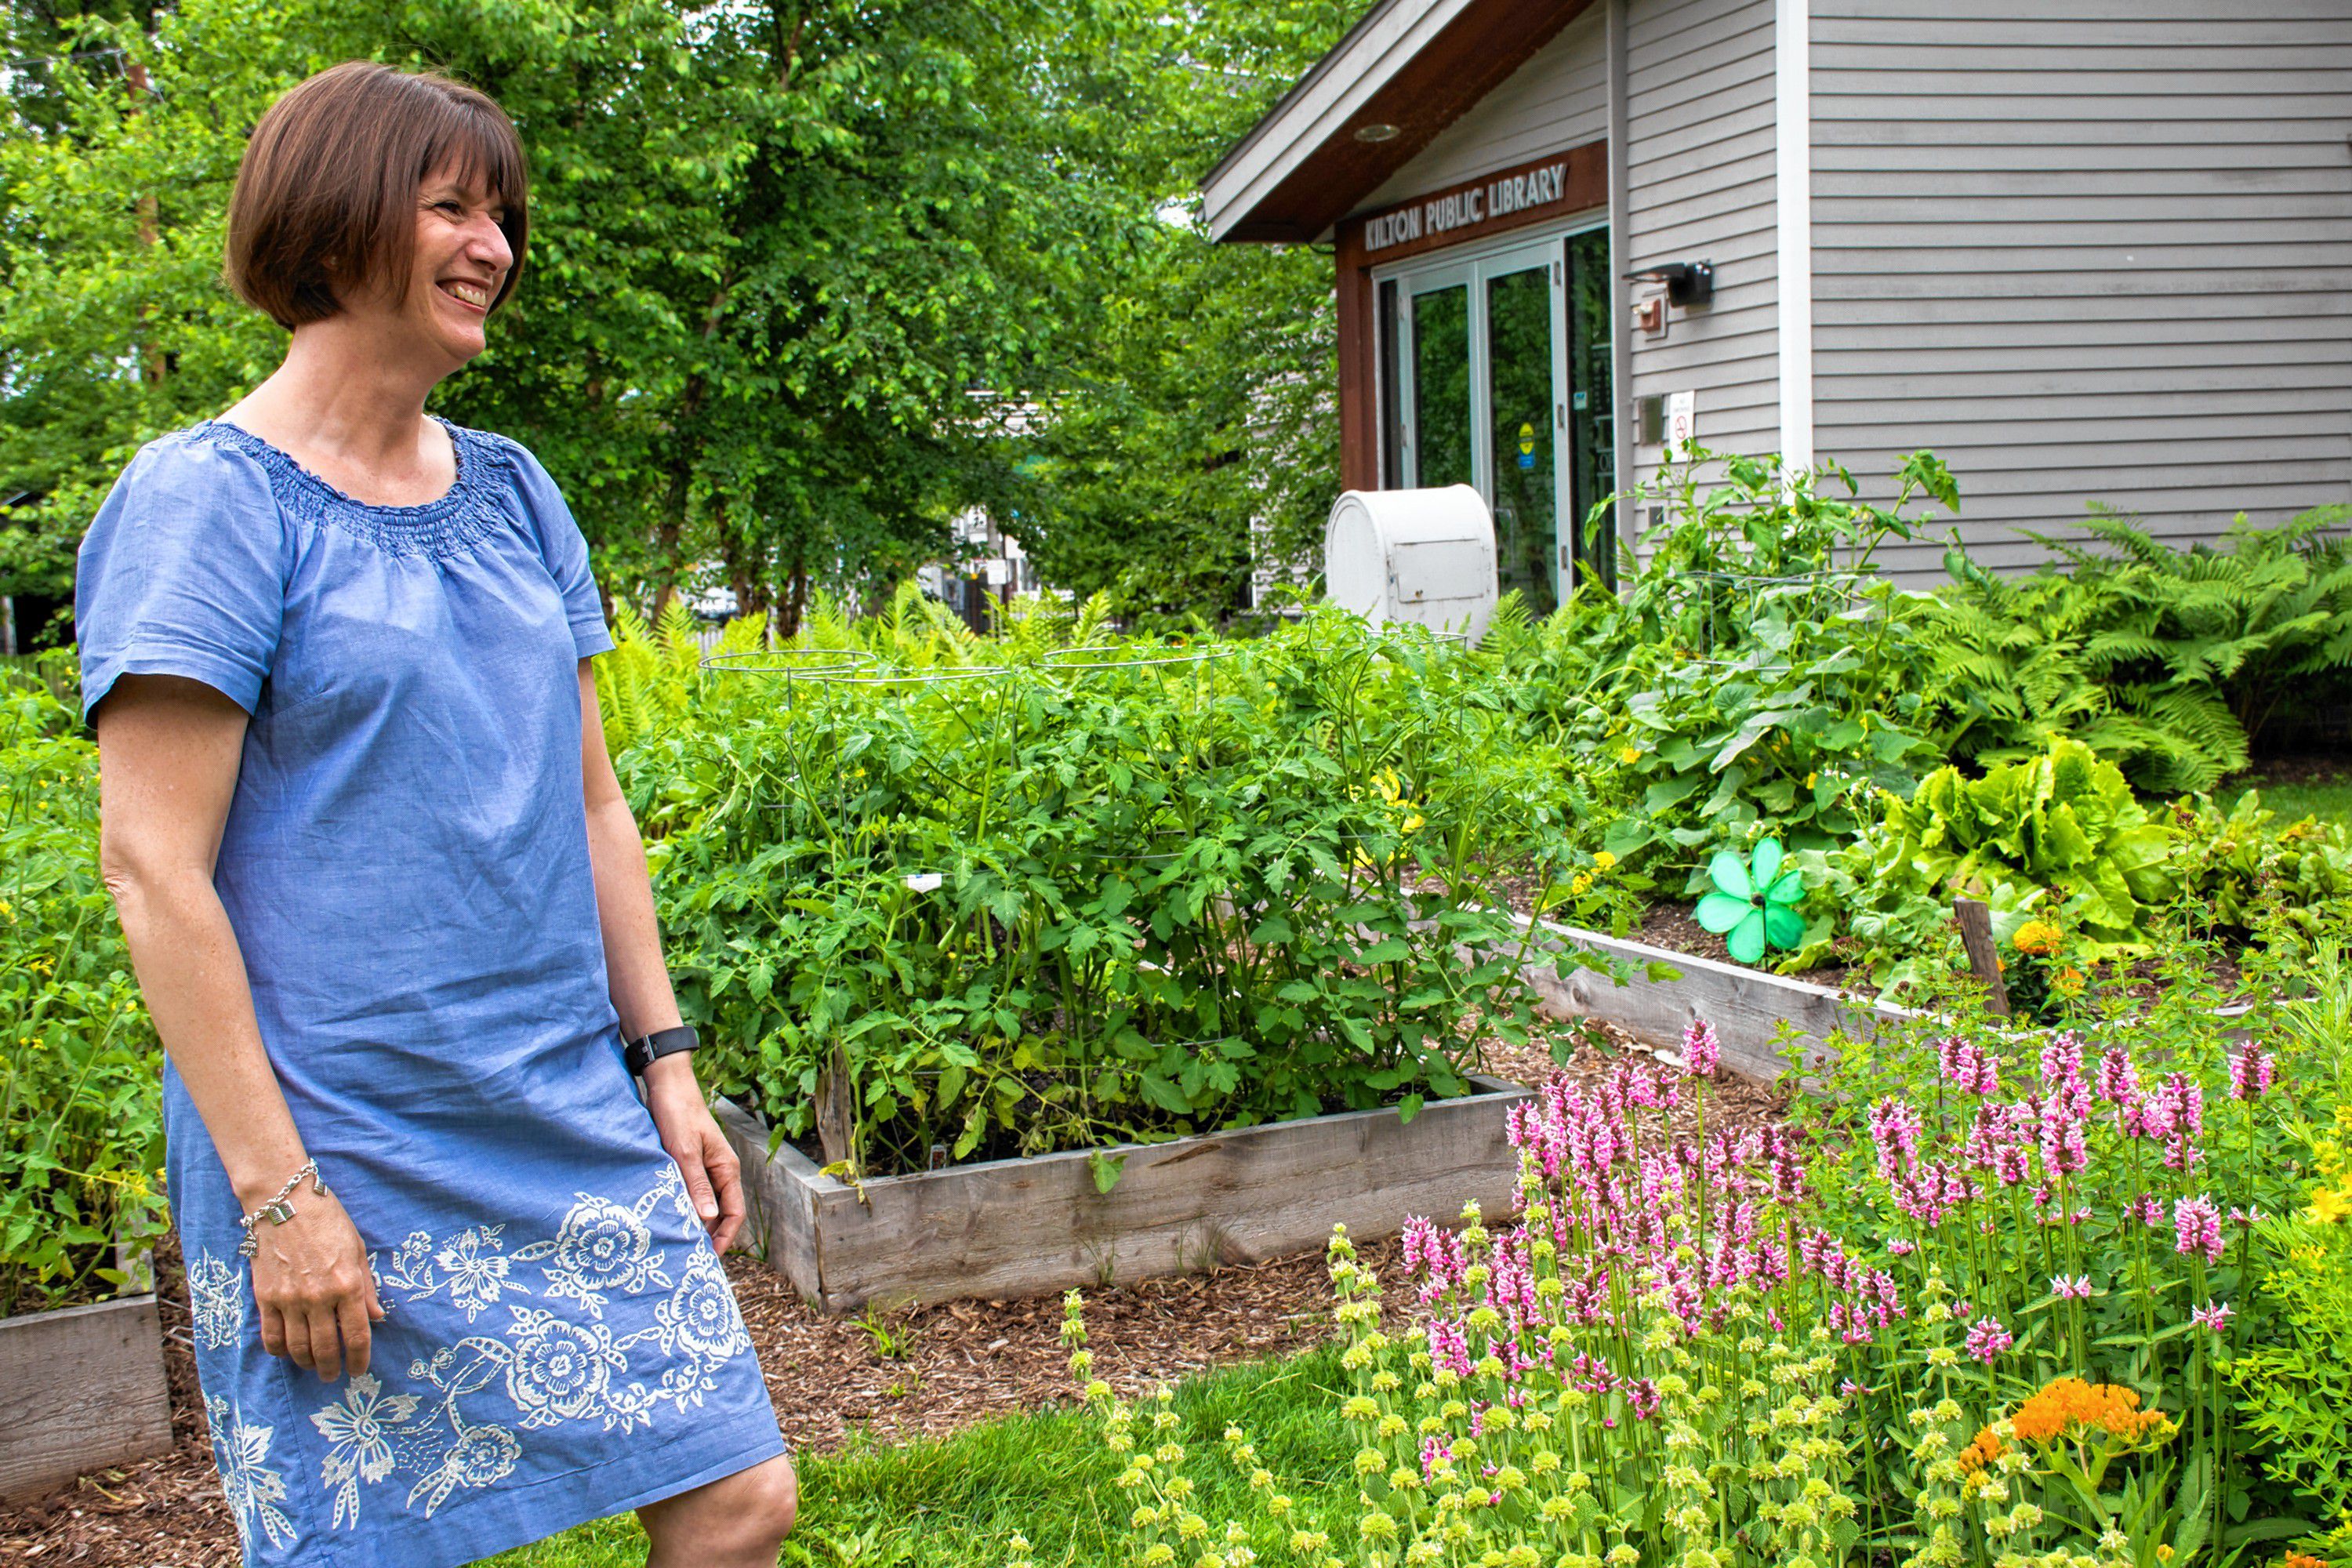 The library boasts a community garden on the site of the former wood pellet silo. On a quick break, Amy Lappin Deputy Director of the Lebanon Public Libraries takes a little time to enjoy some of the wildflowers. Nancy Nutile-McMenemy photograph.